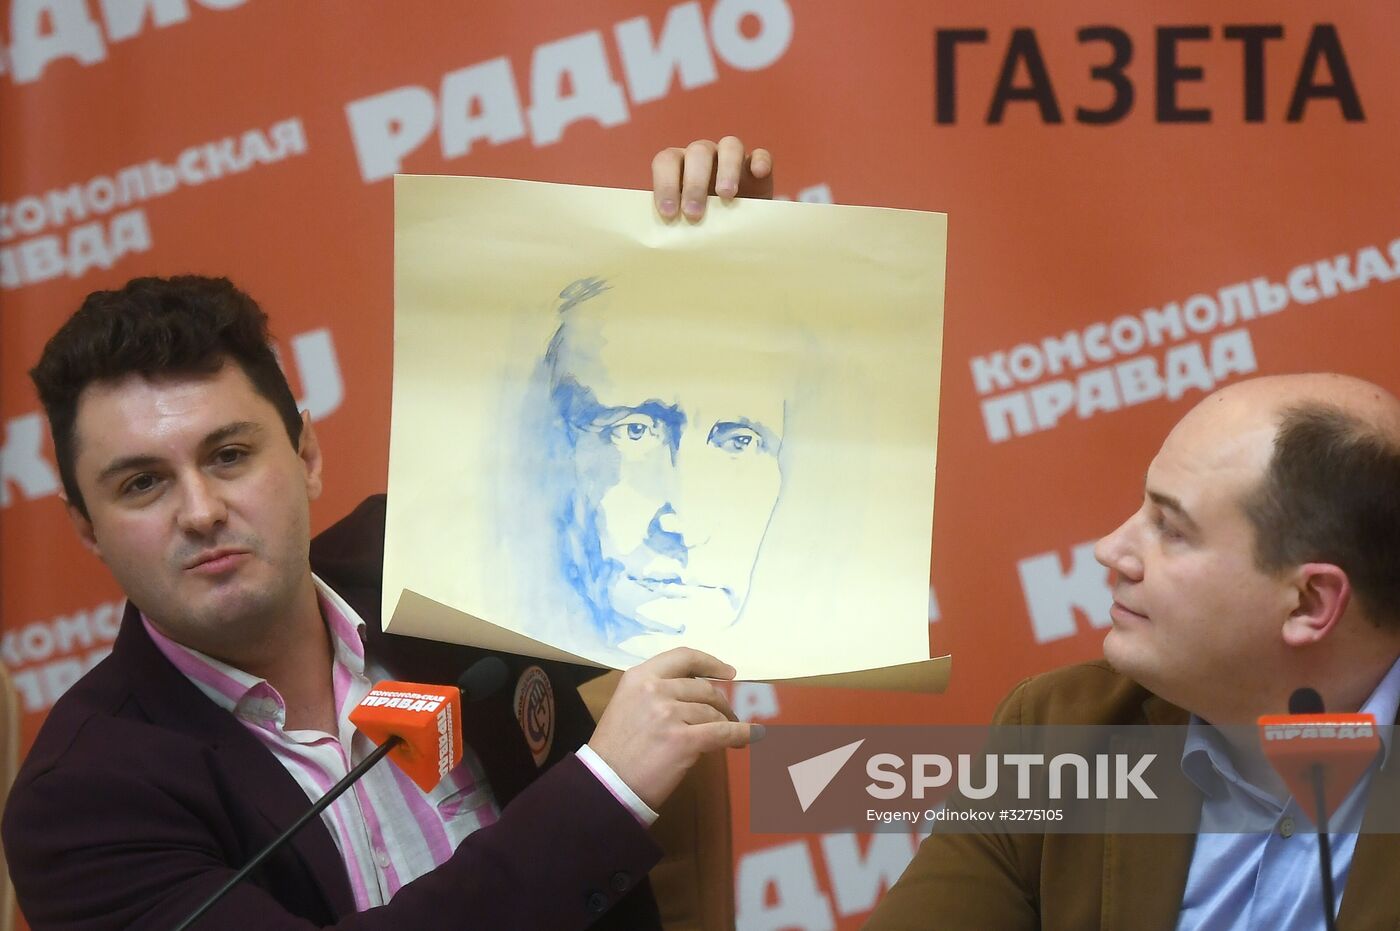 News conference by political bloc, 'Vladimir Putin, the majority's candidate'